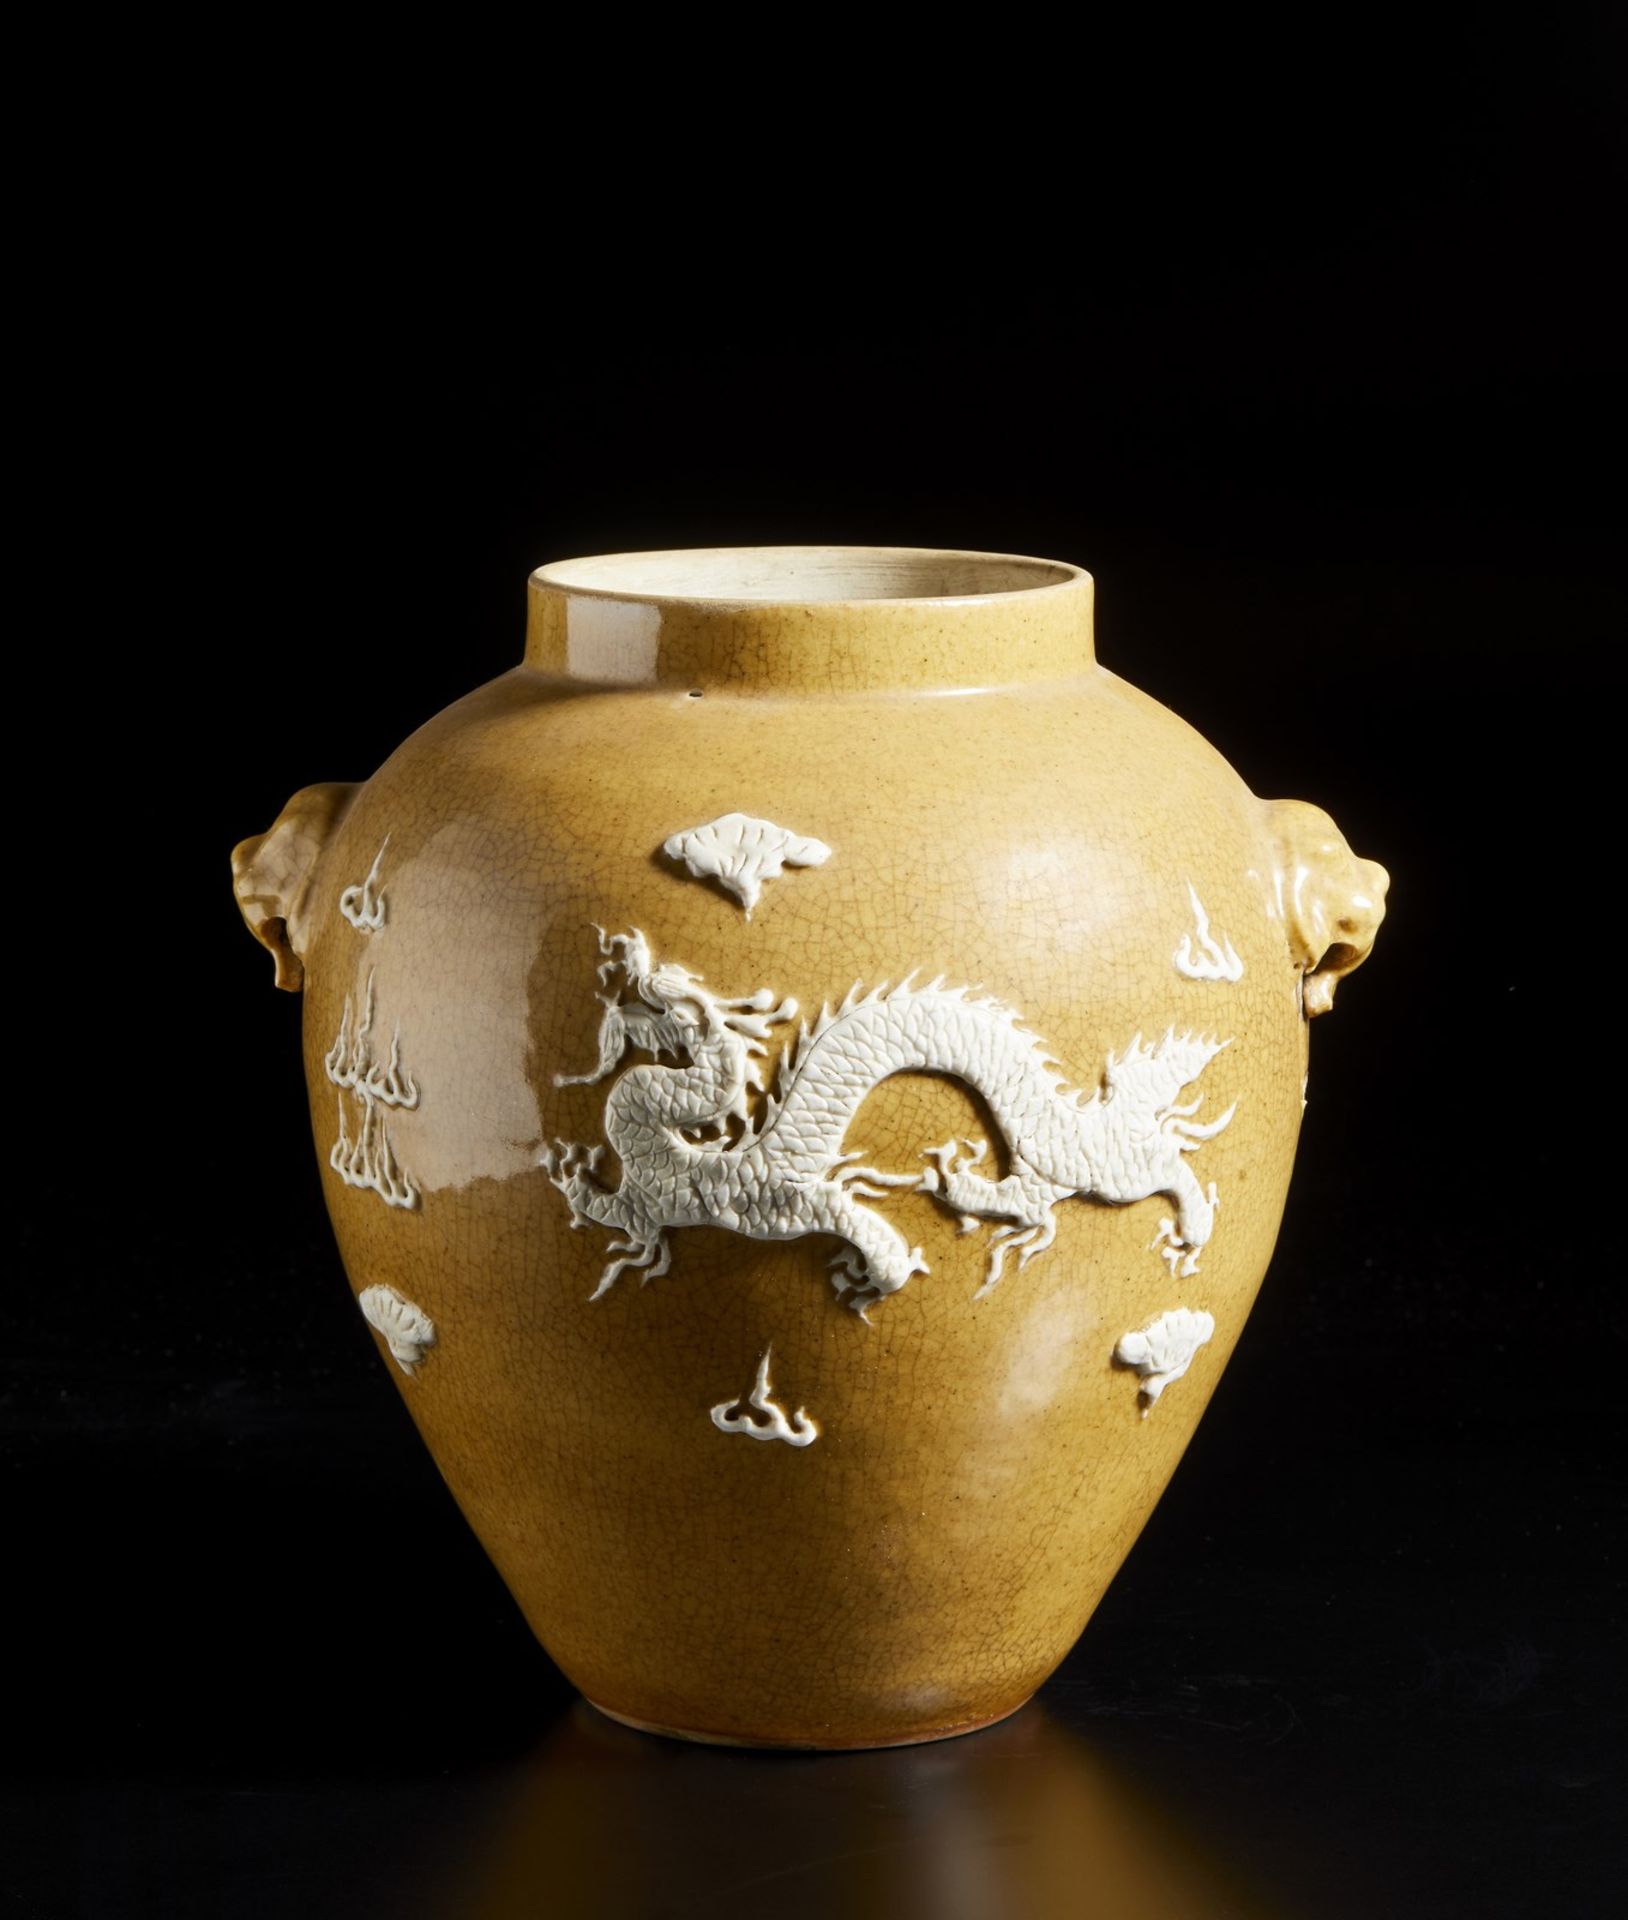 A beige glazed porcelain vase with relief decoration China, Qing dynasty, 19th century Cm 28,00 x